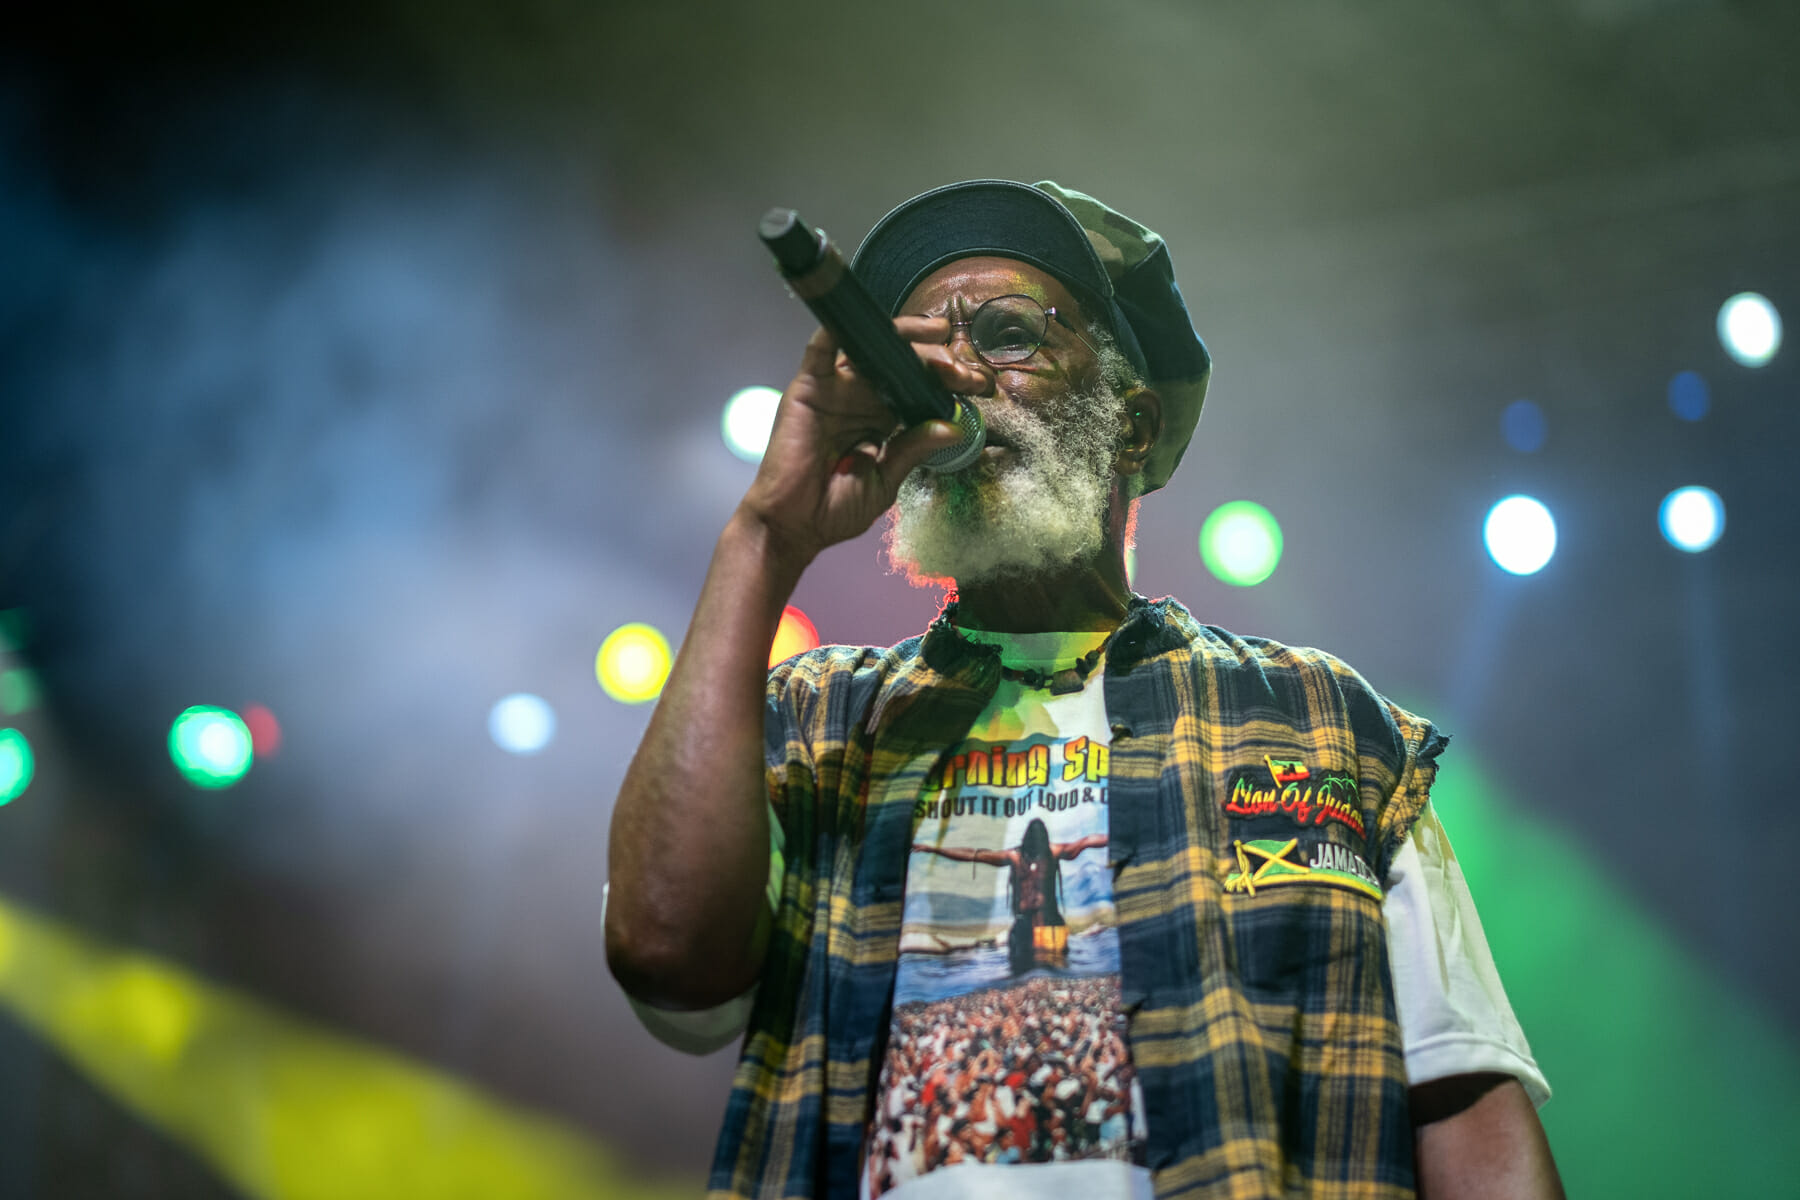 Burning Spear Performs in New York City After 12 Years (A Gallery)